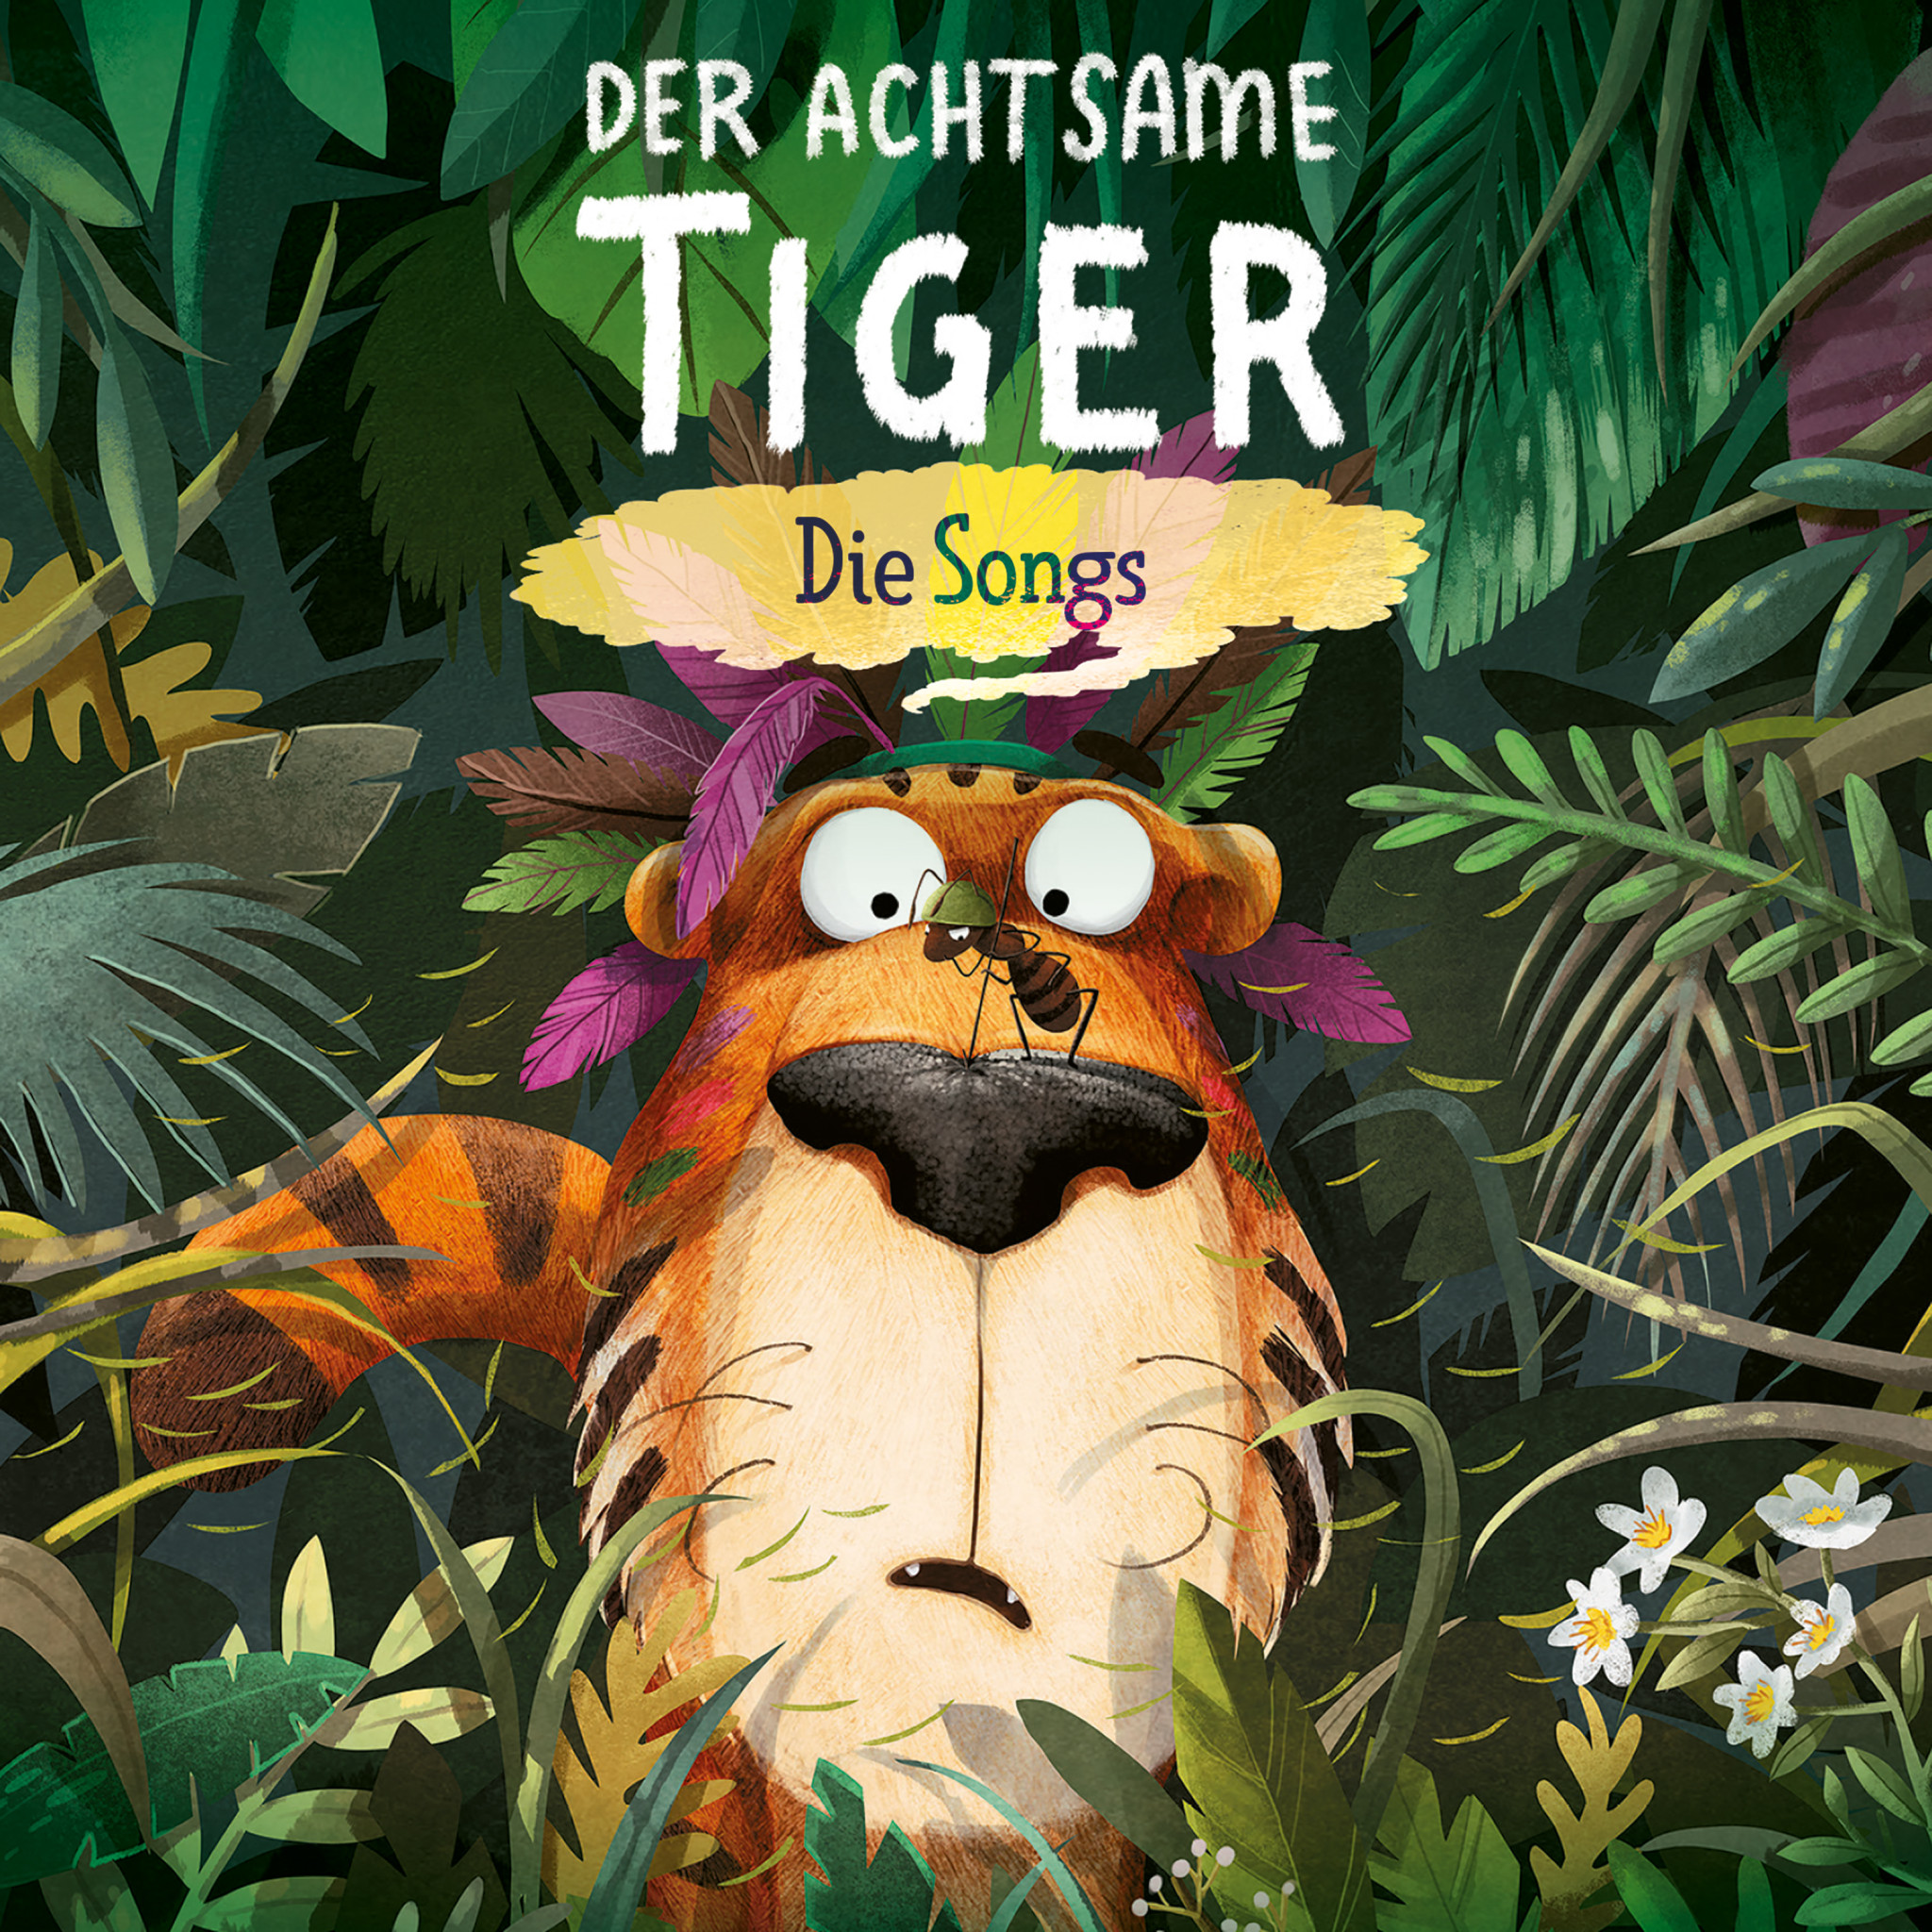 Die Songs Der achtsame Tiger COVER